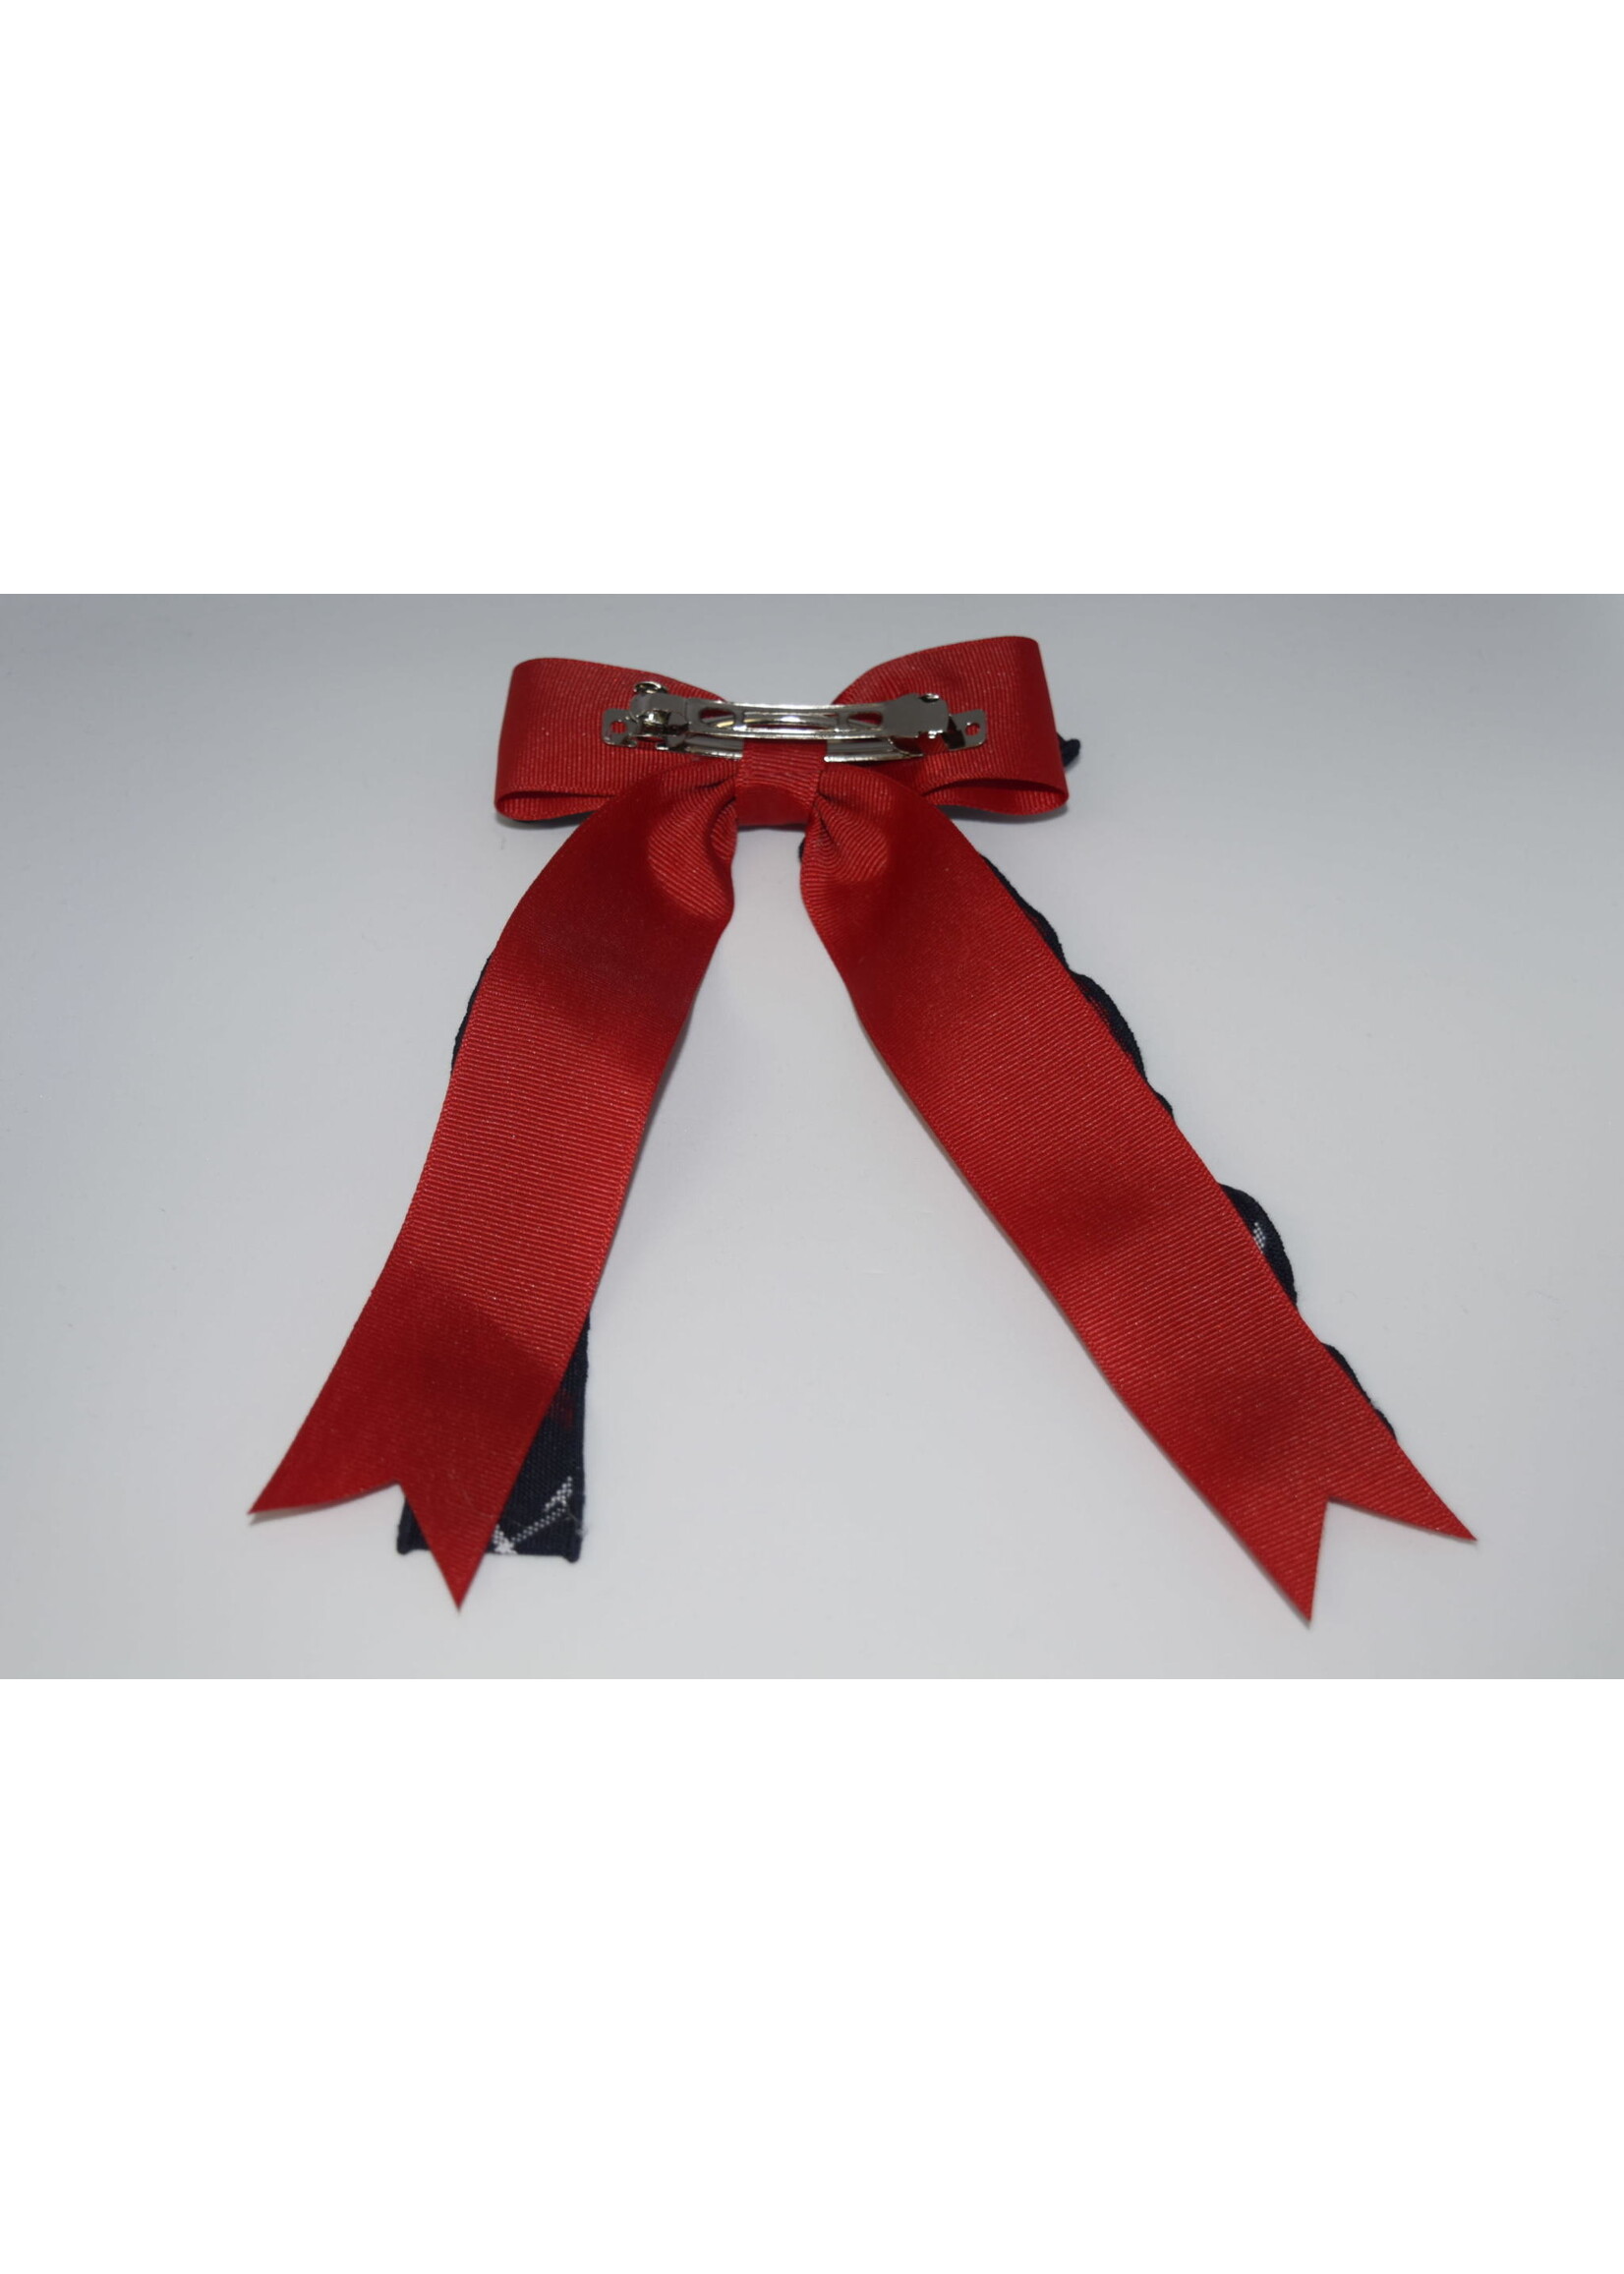 Large 2-layered plaid & grosgrain ribbon bow w/tails P36 RED